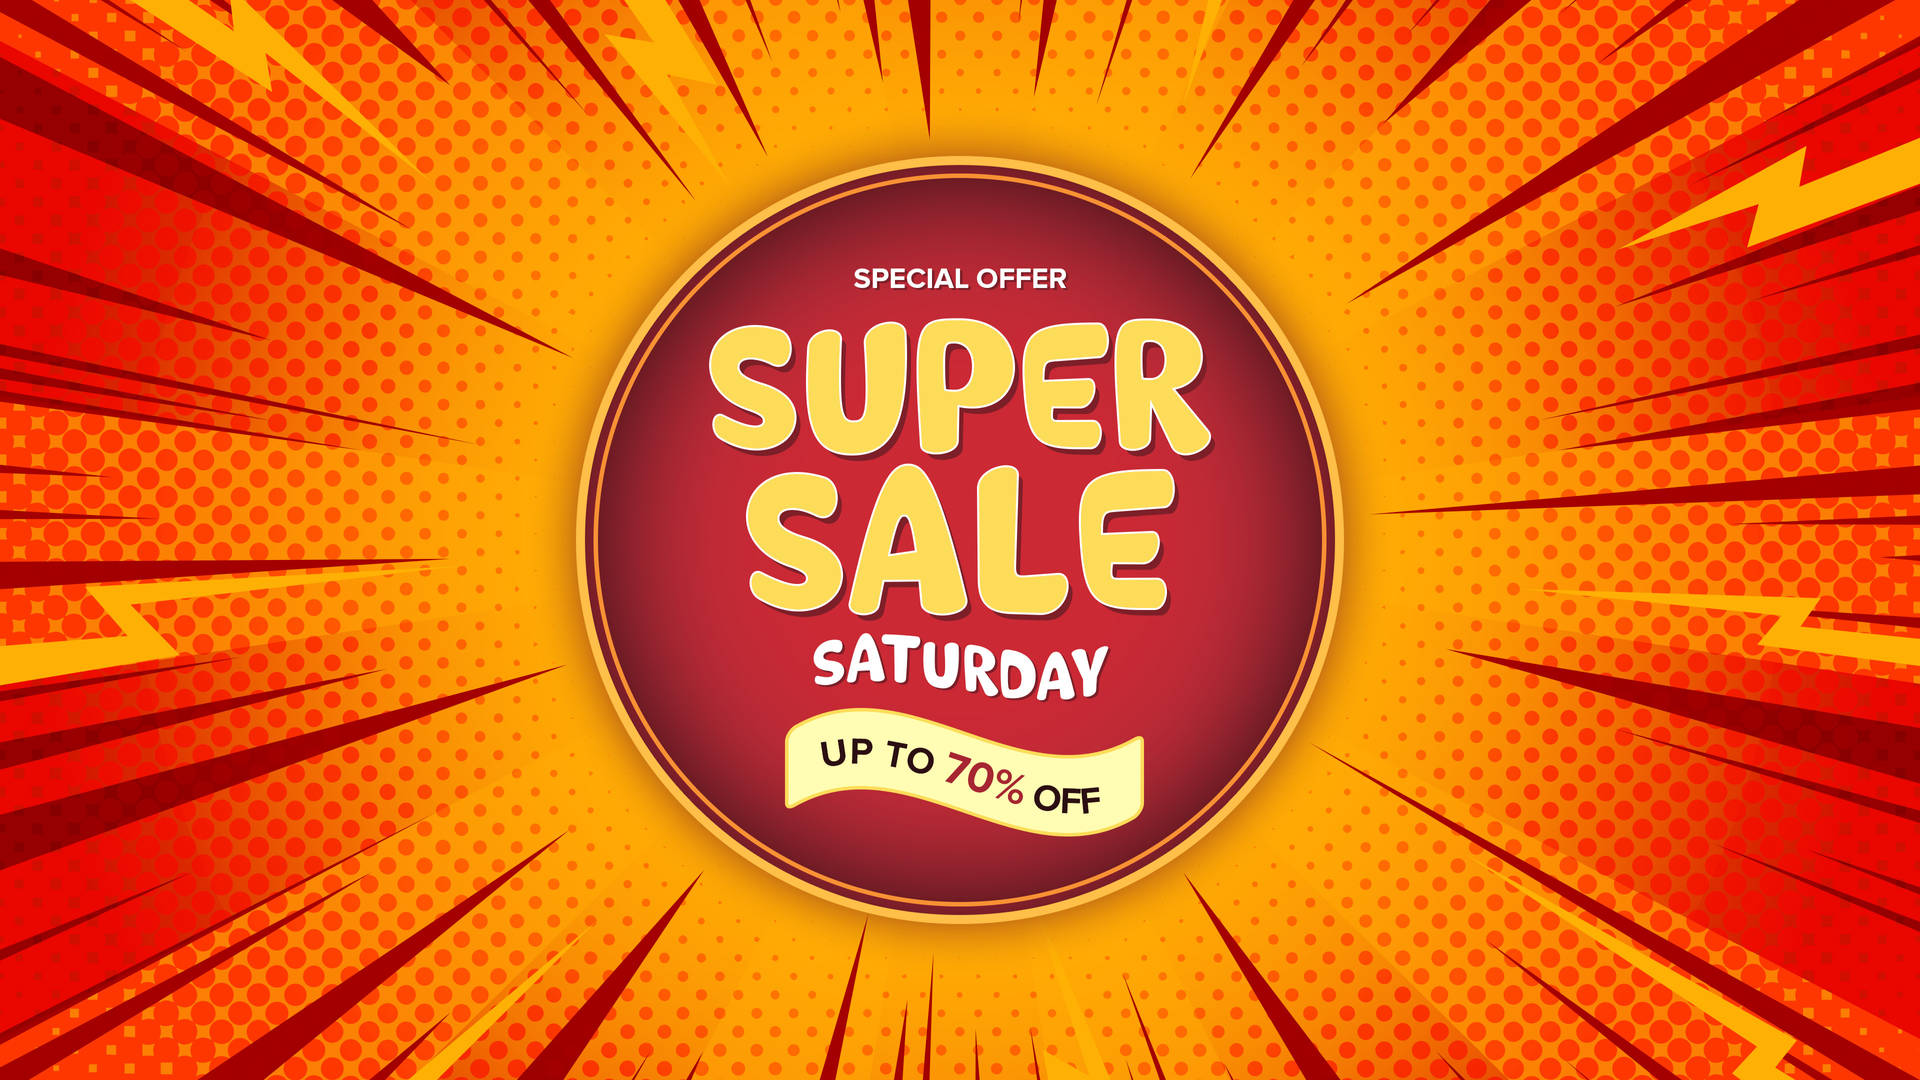 Super Saturday Sale On Red Golden Circle